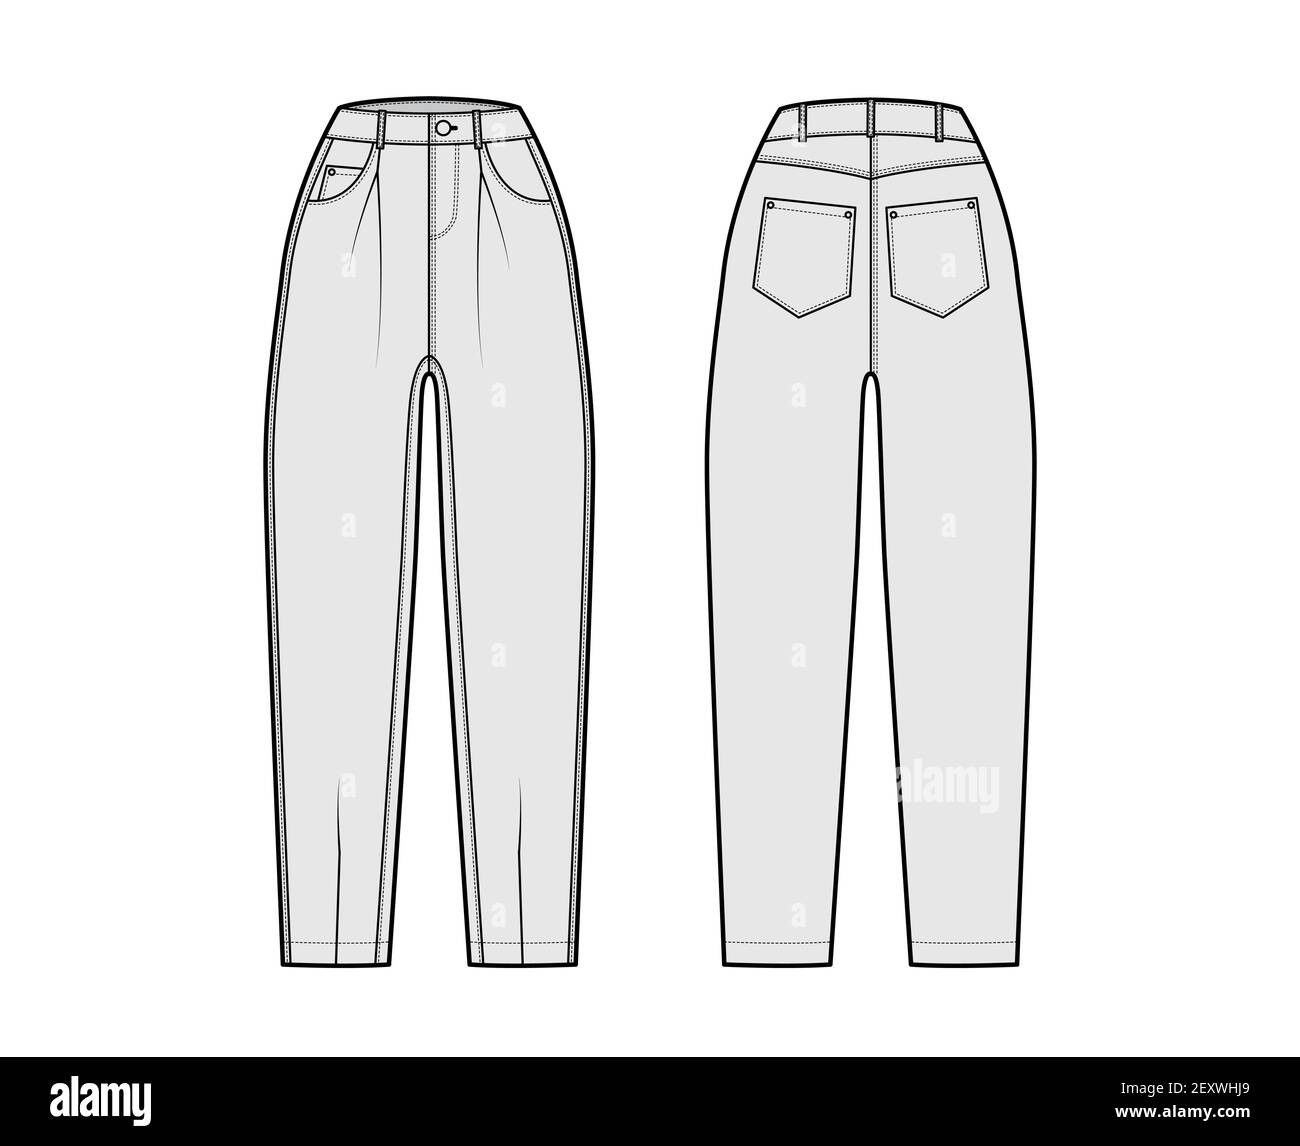 Slouchy Jeans Denim pants technical fashion illustration with ankle ...